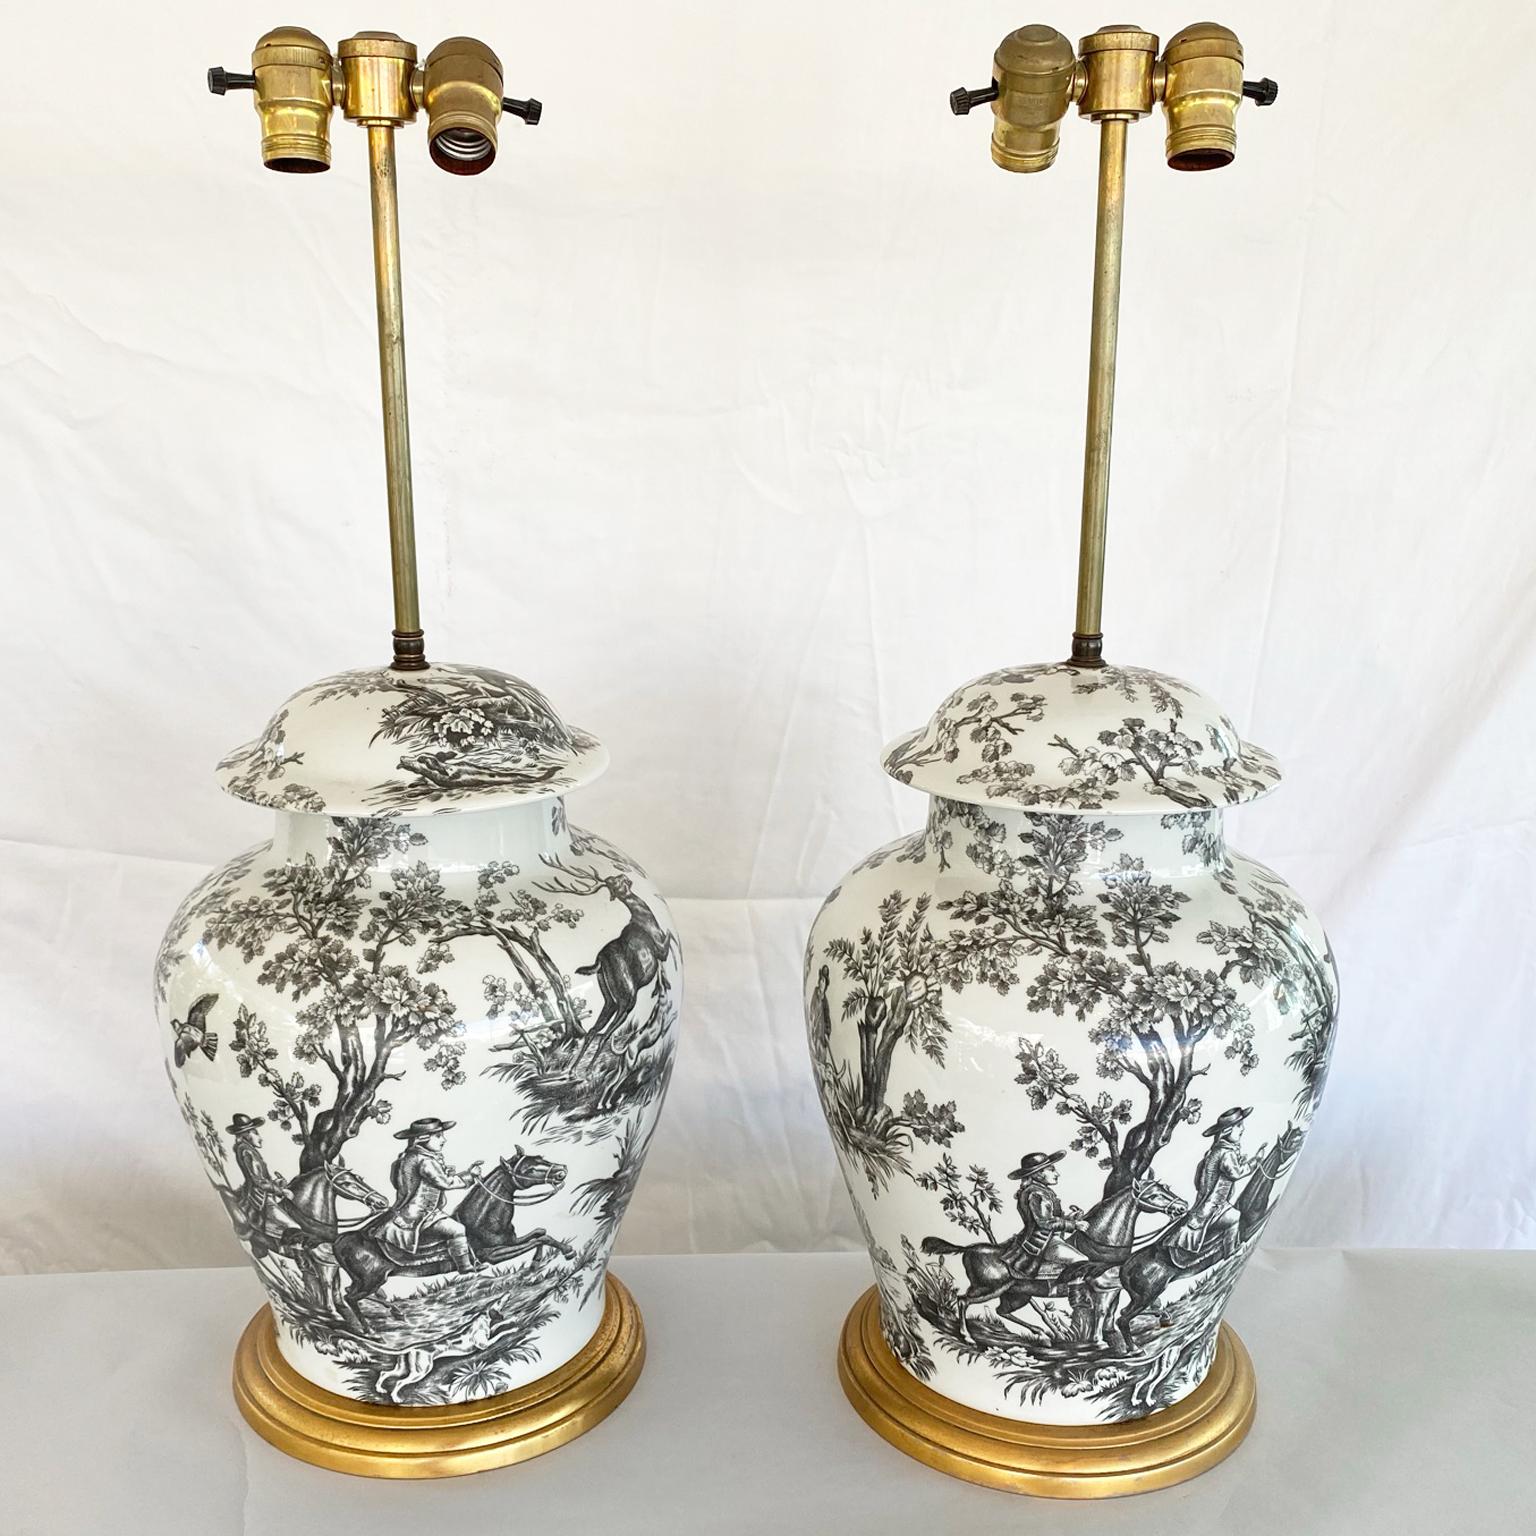 Pair of porcelain lidded urns, in ginger jar form, decorated in a black and white toile hunt scene, on graduated giltwood base. 

Stock ID: D9365.